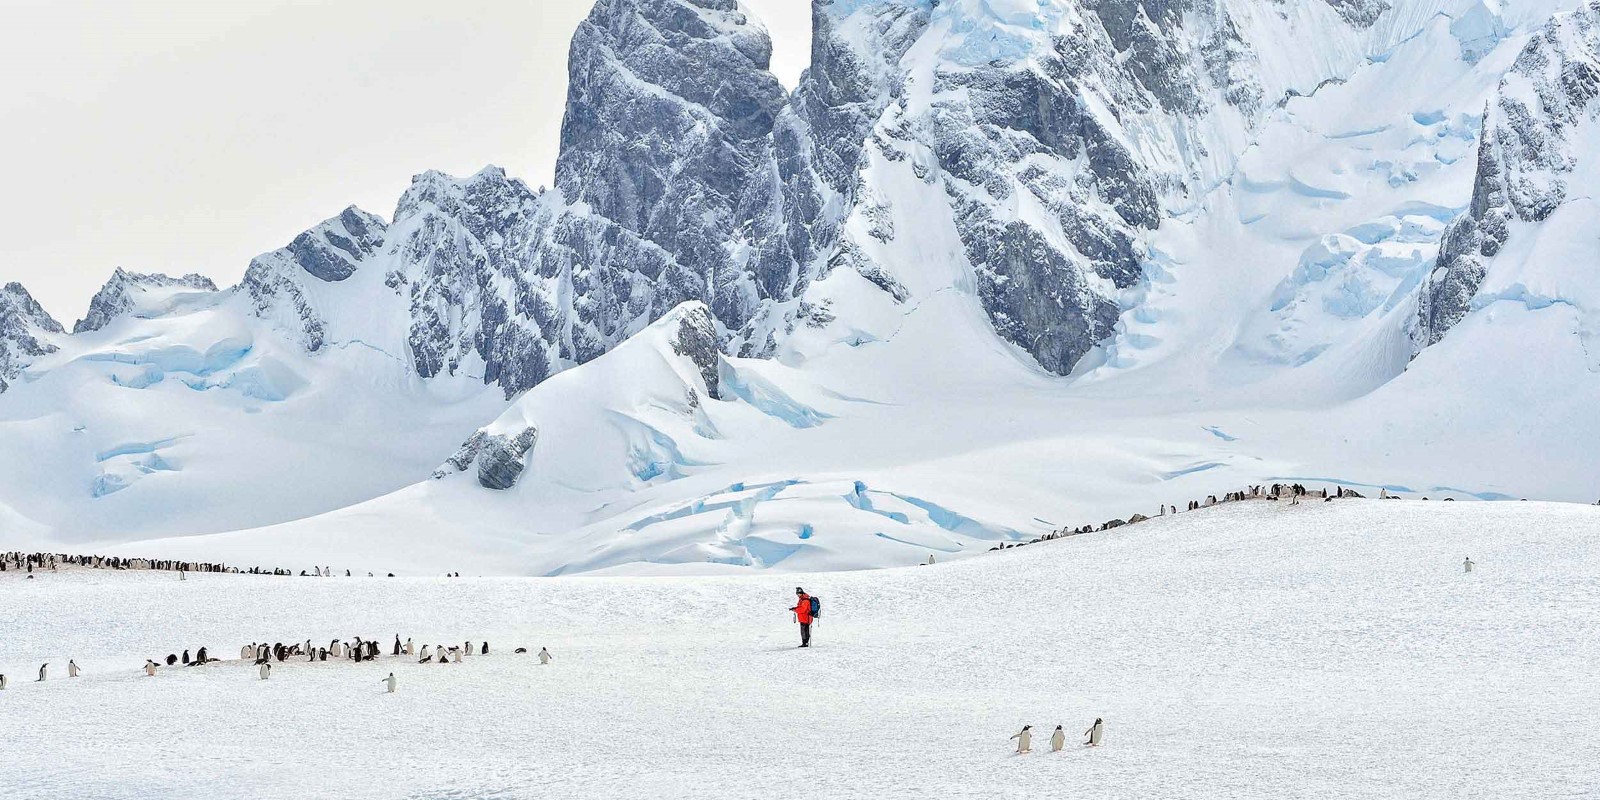 Man in middle of penguin colony in vast antarctic landscape